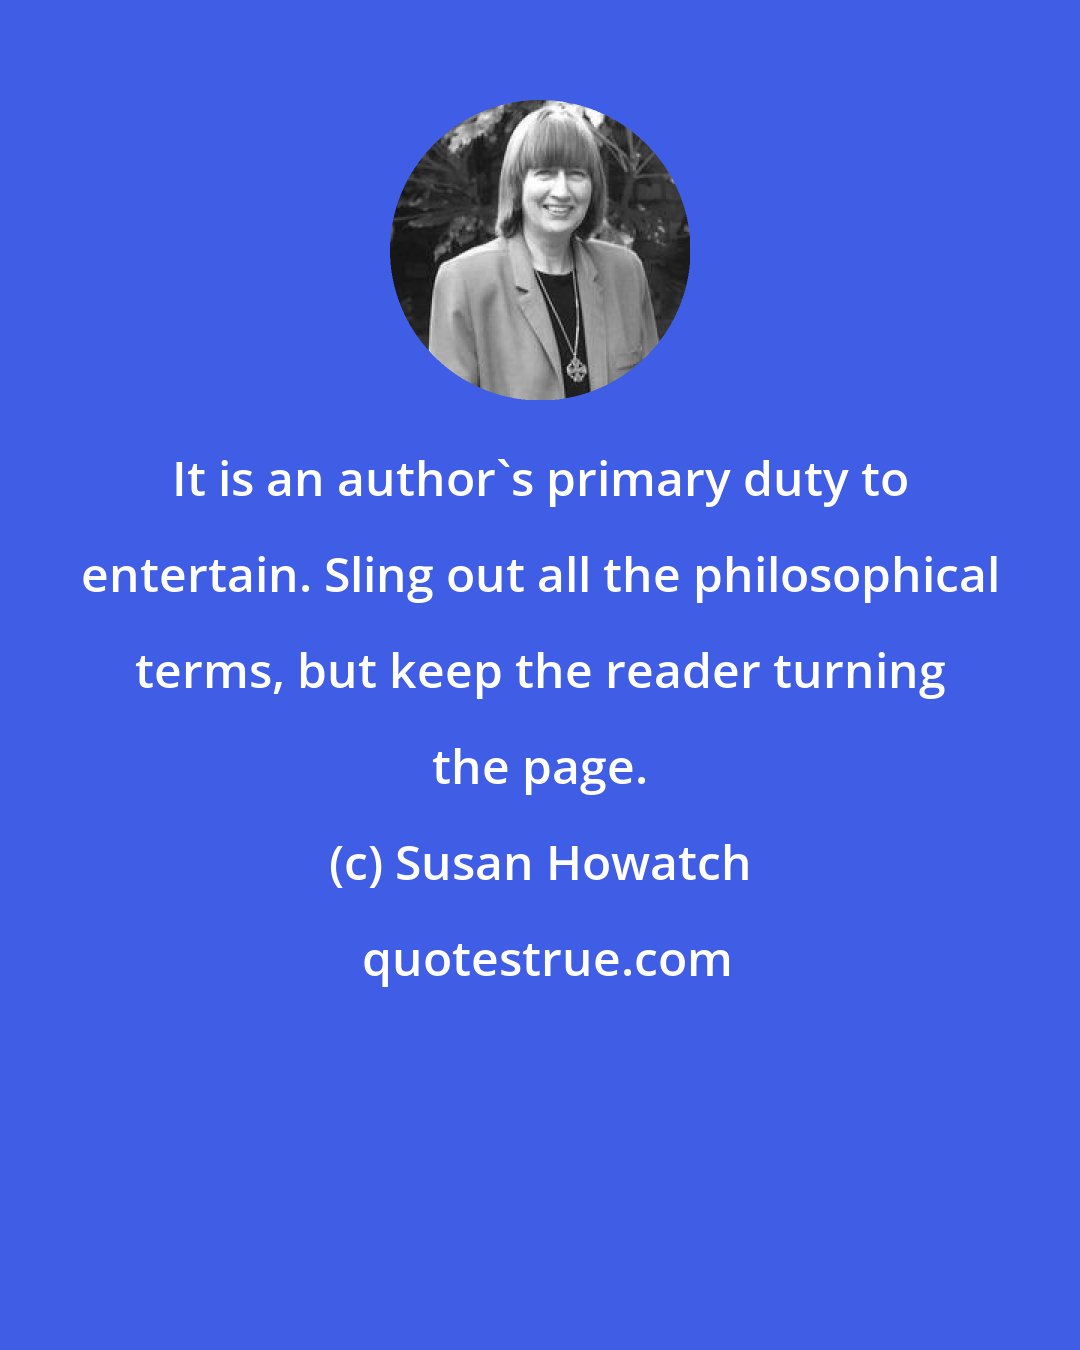 Susan Howatch: It is an author's primary duty to entertain. Sling out all the philosophical terms, but keep the reader turning the page.